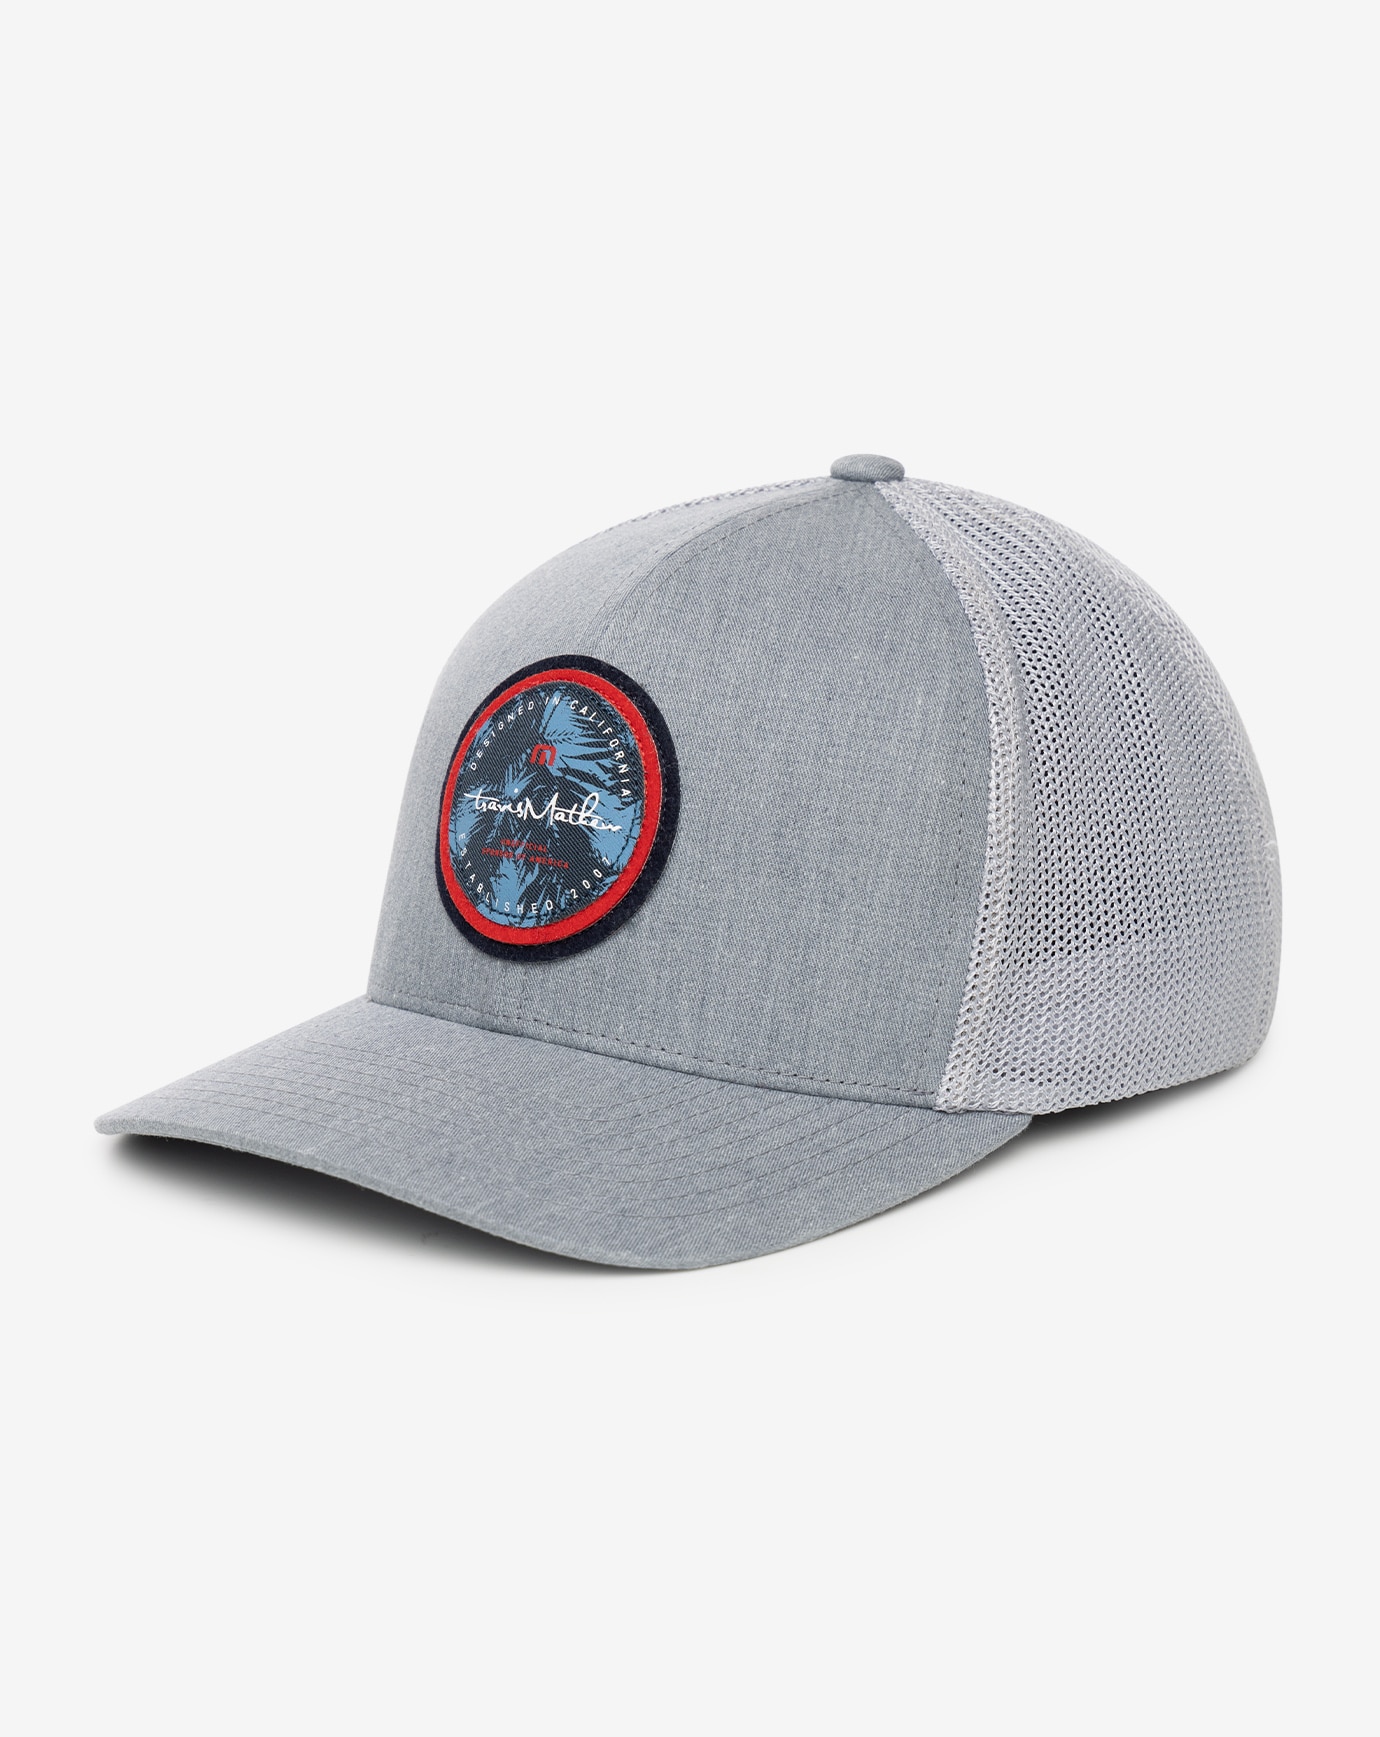 IN TM WE TRUST FITTED HAT Image Thumbnail 2